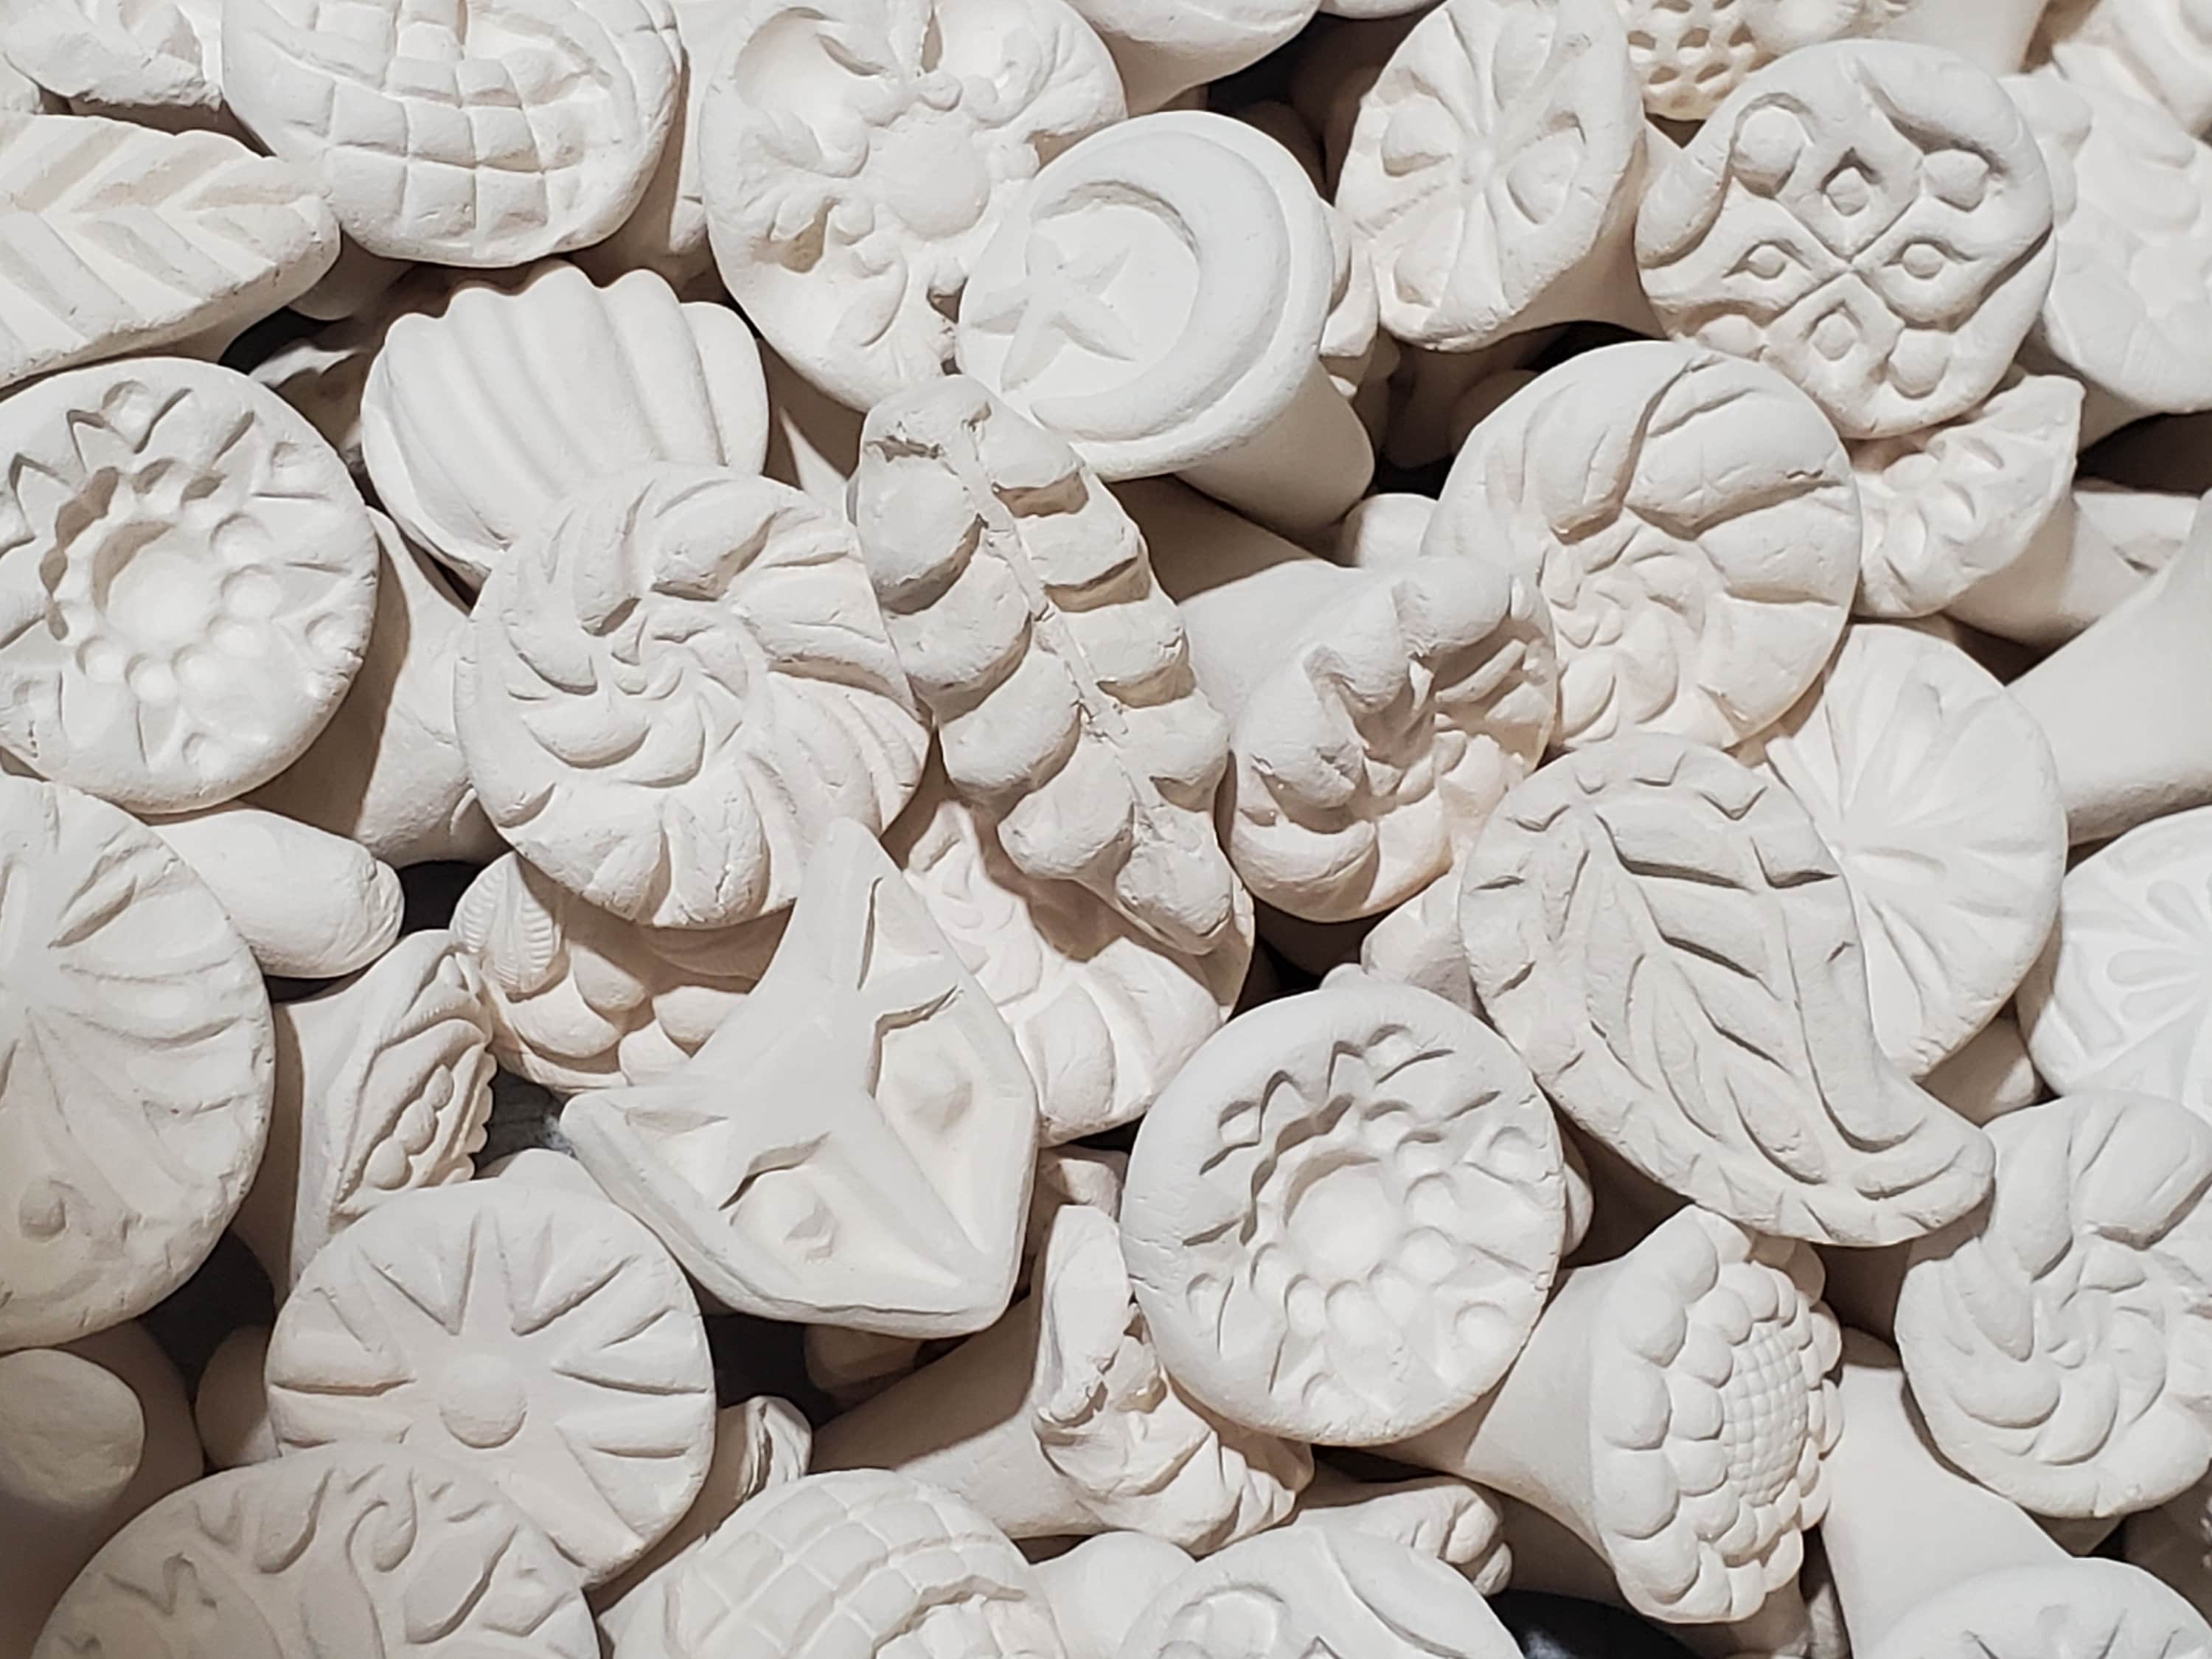 Stamps for clay decorating - The Ceramic Shop